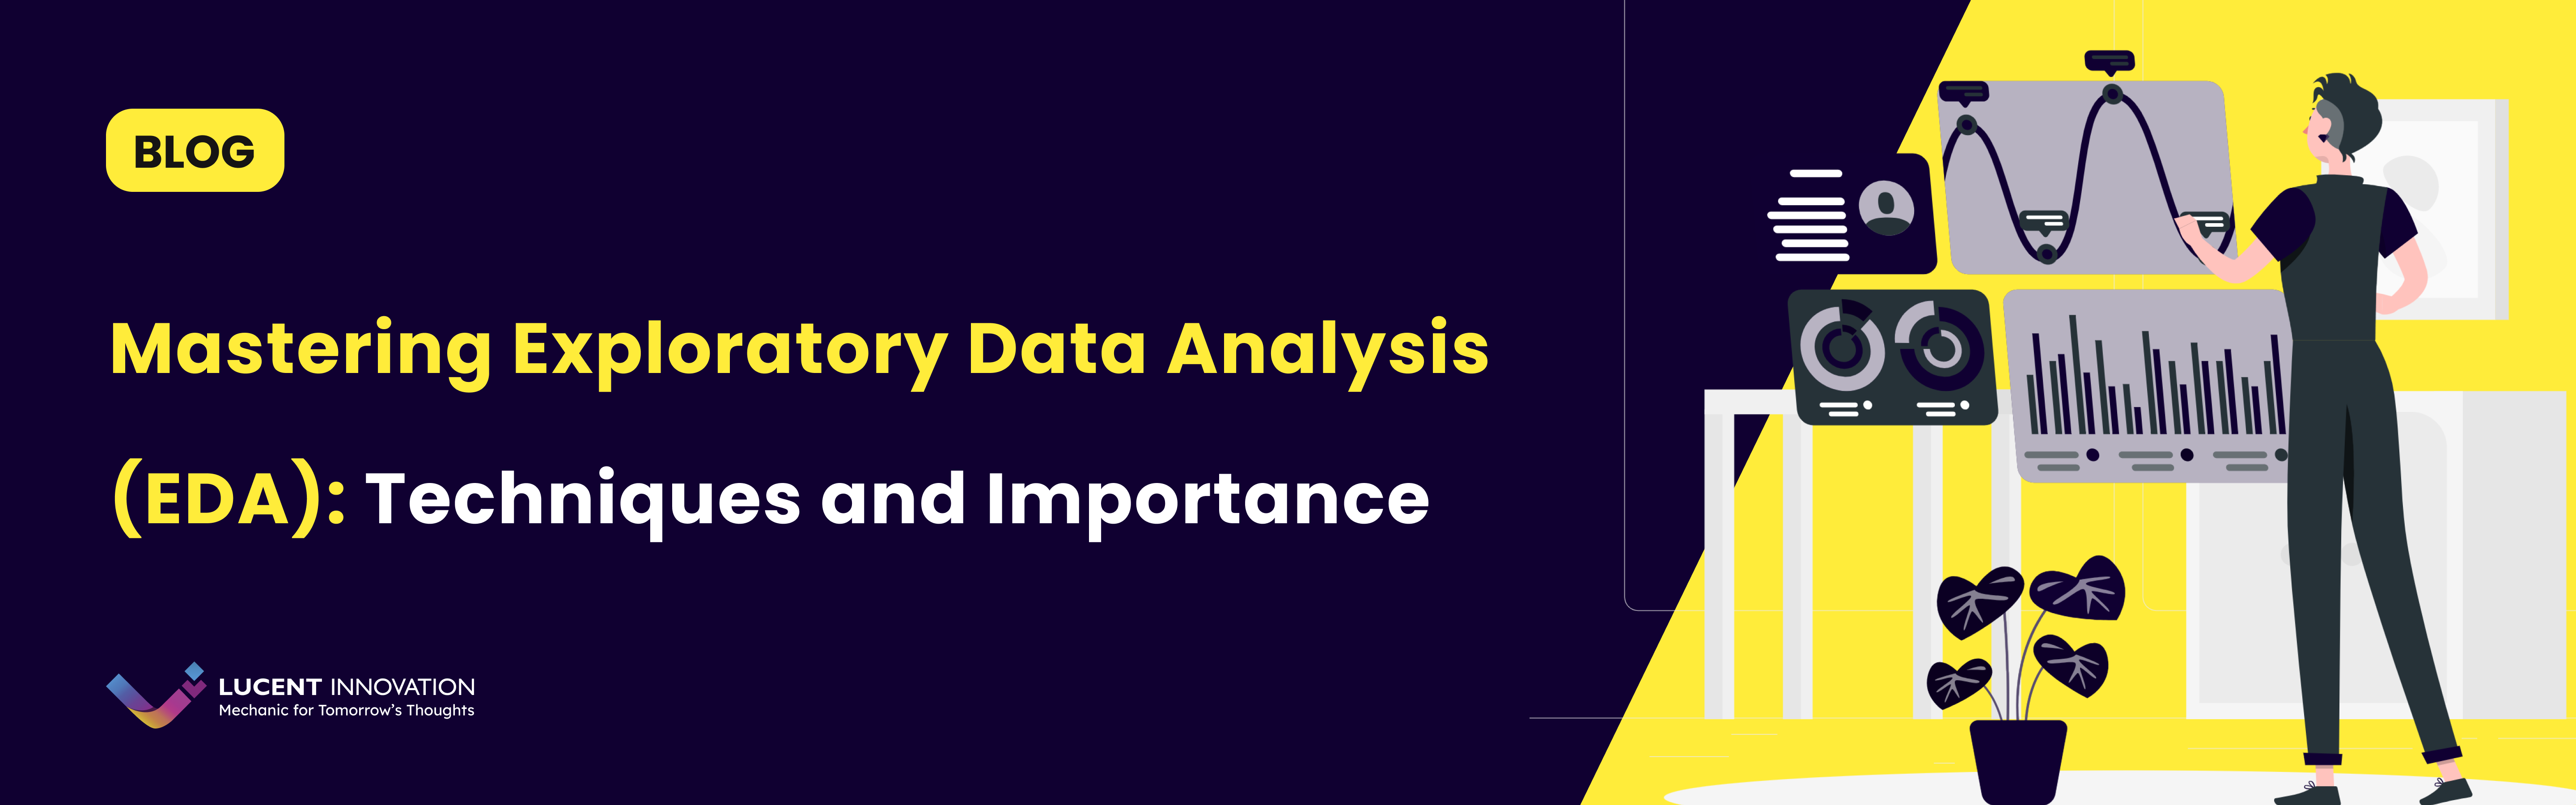 Mastering Exploratory Data Analysis (EDA): Techniques and Importance